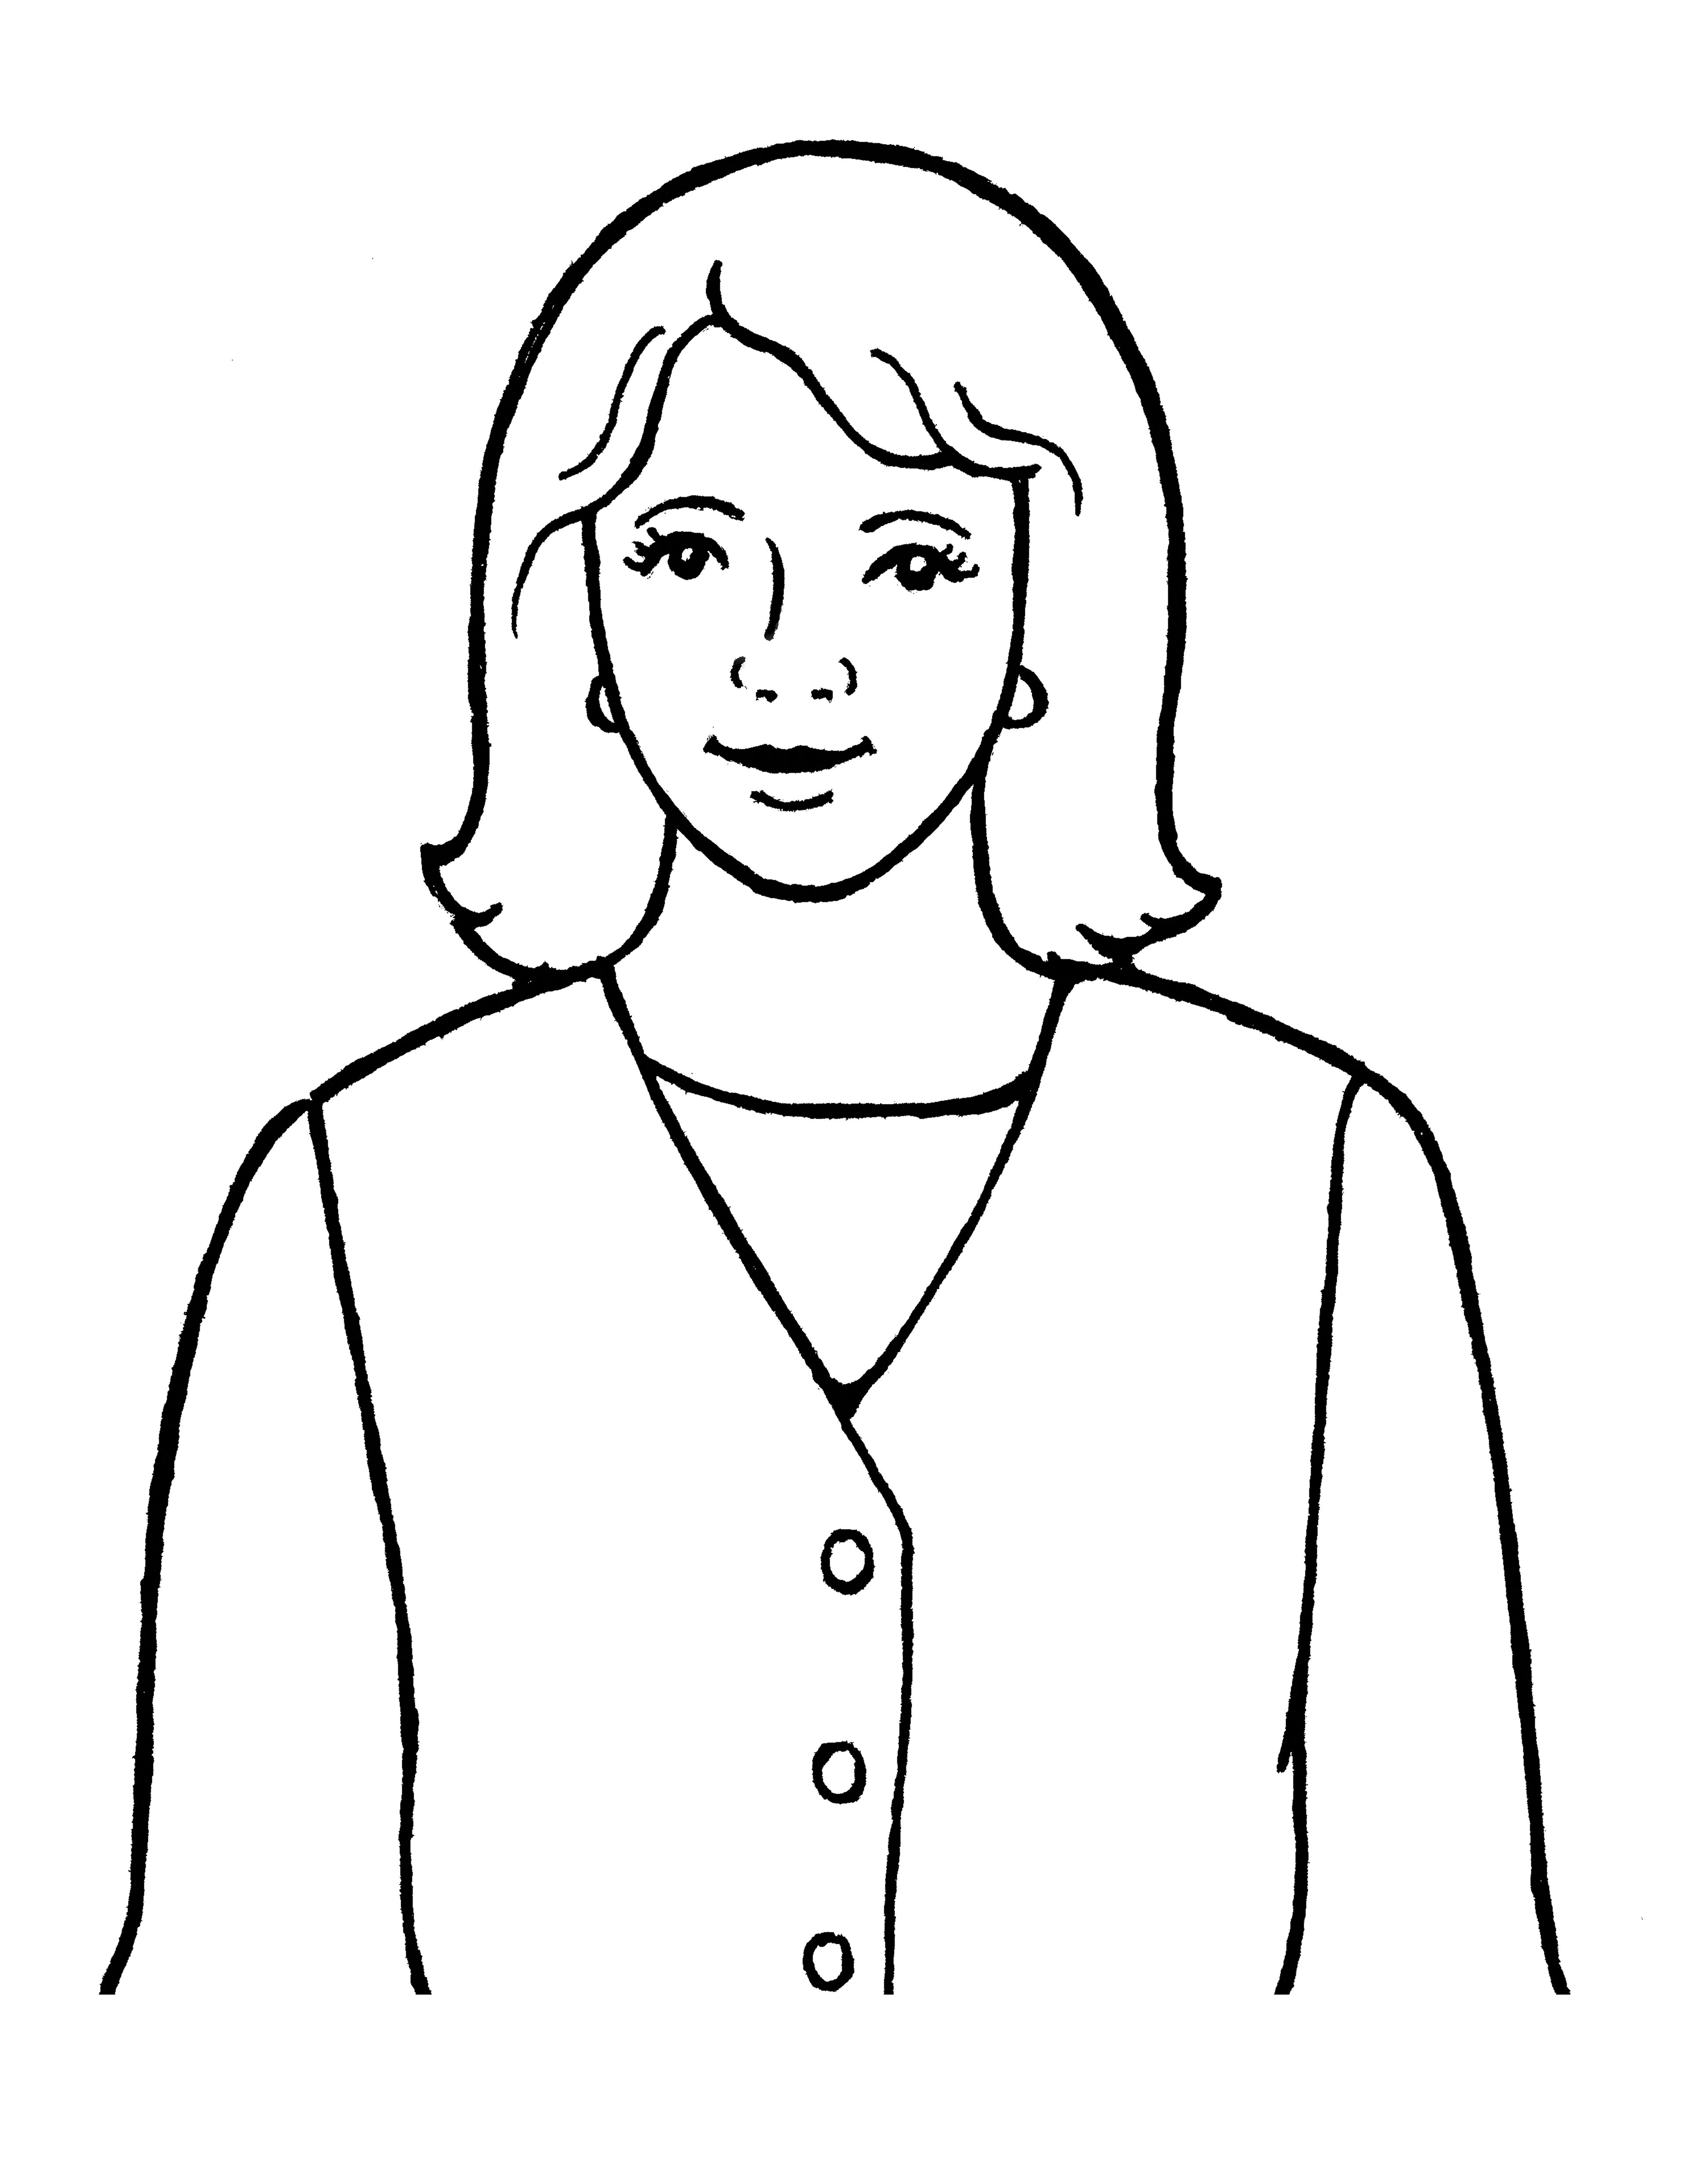 An illustration of a mother from the nursery manual Behold Your Little Ones (2008), page 59.